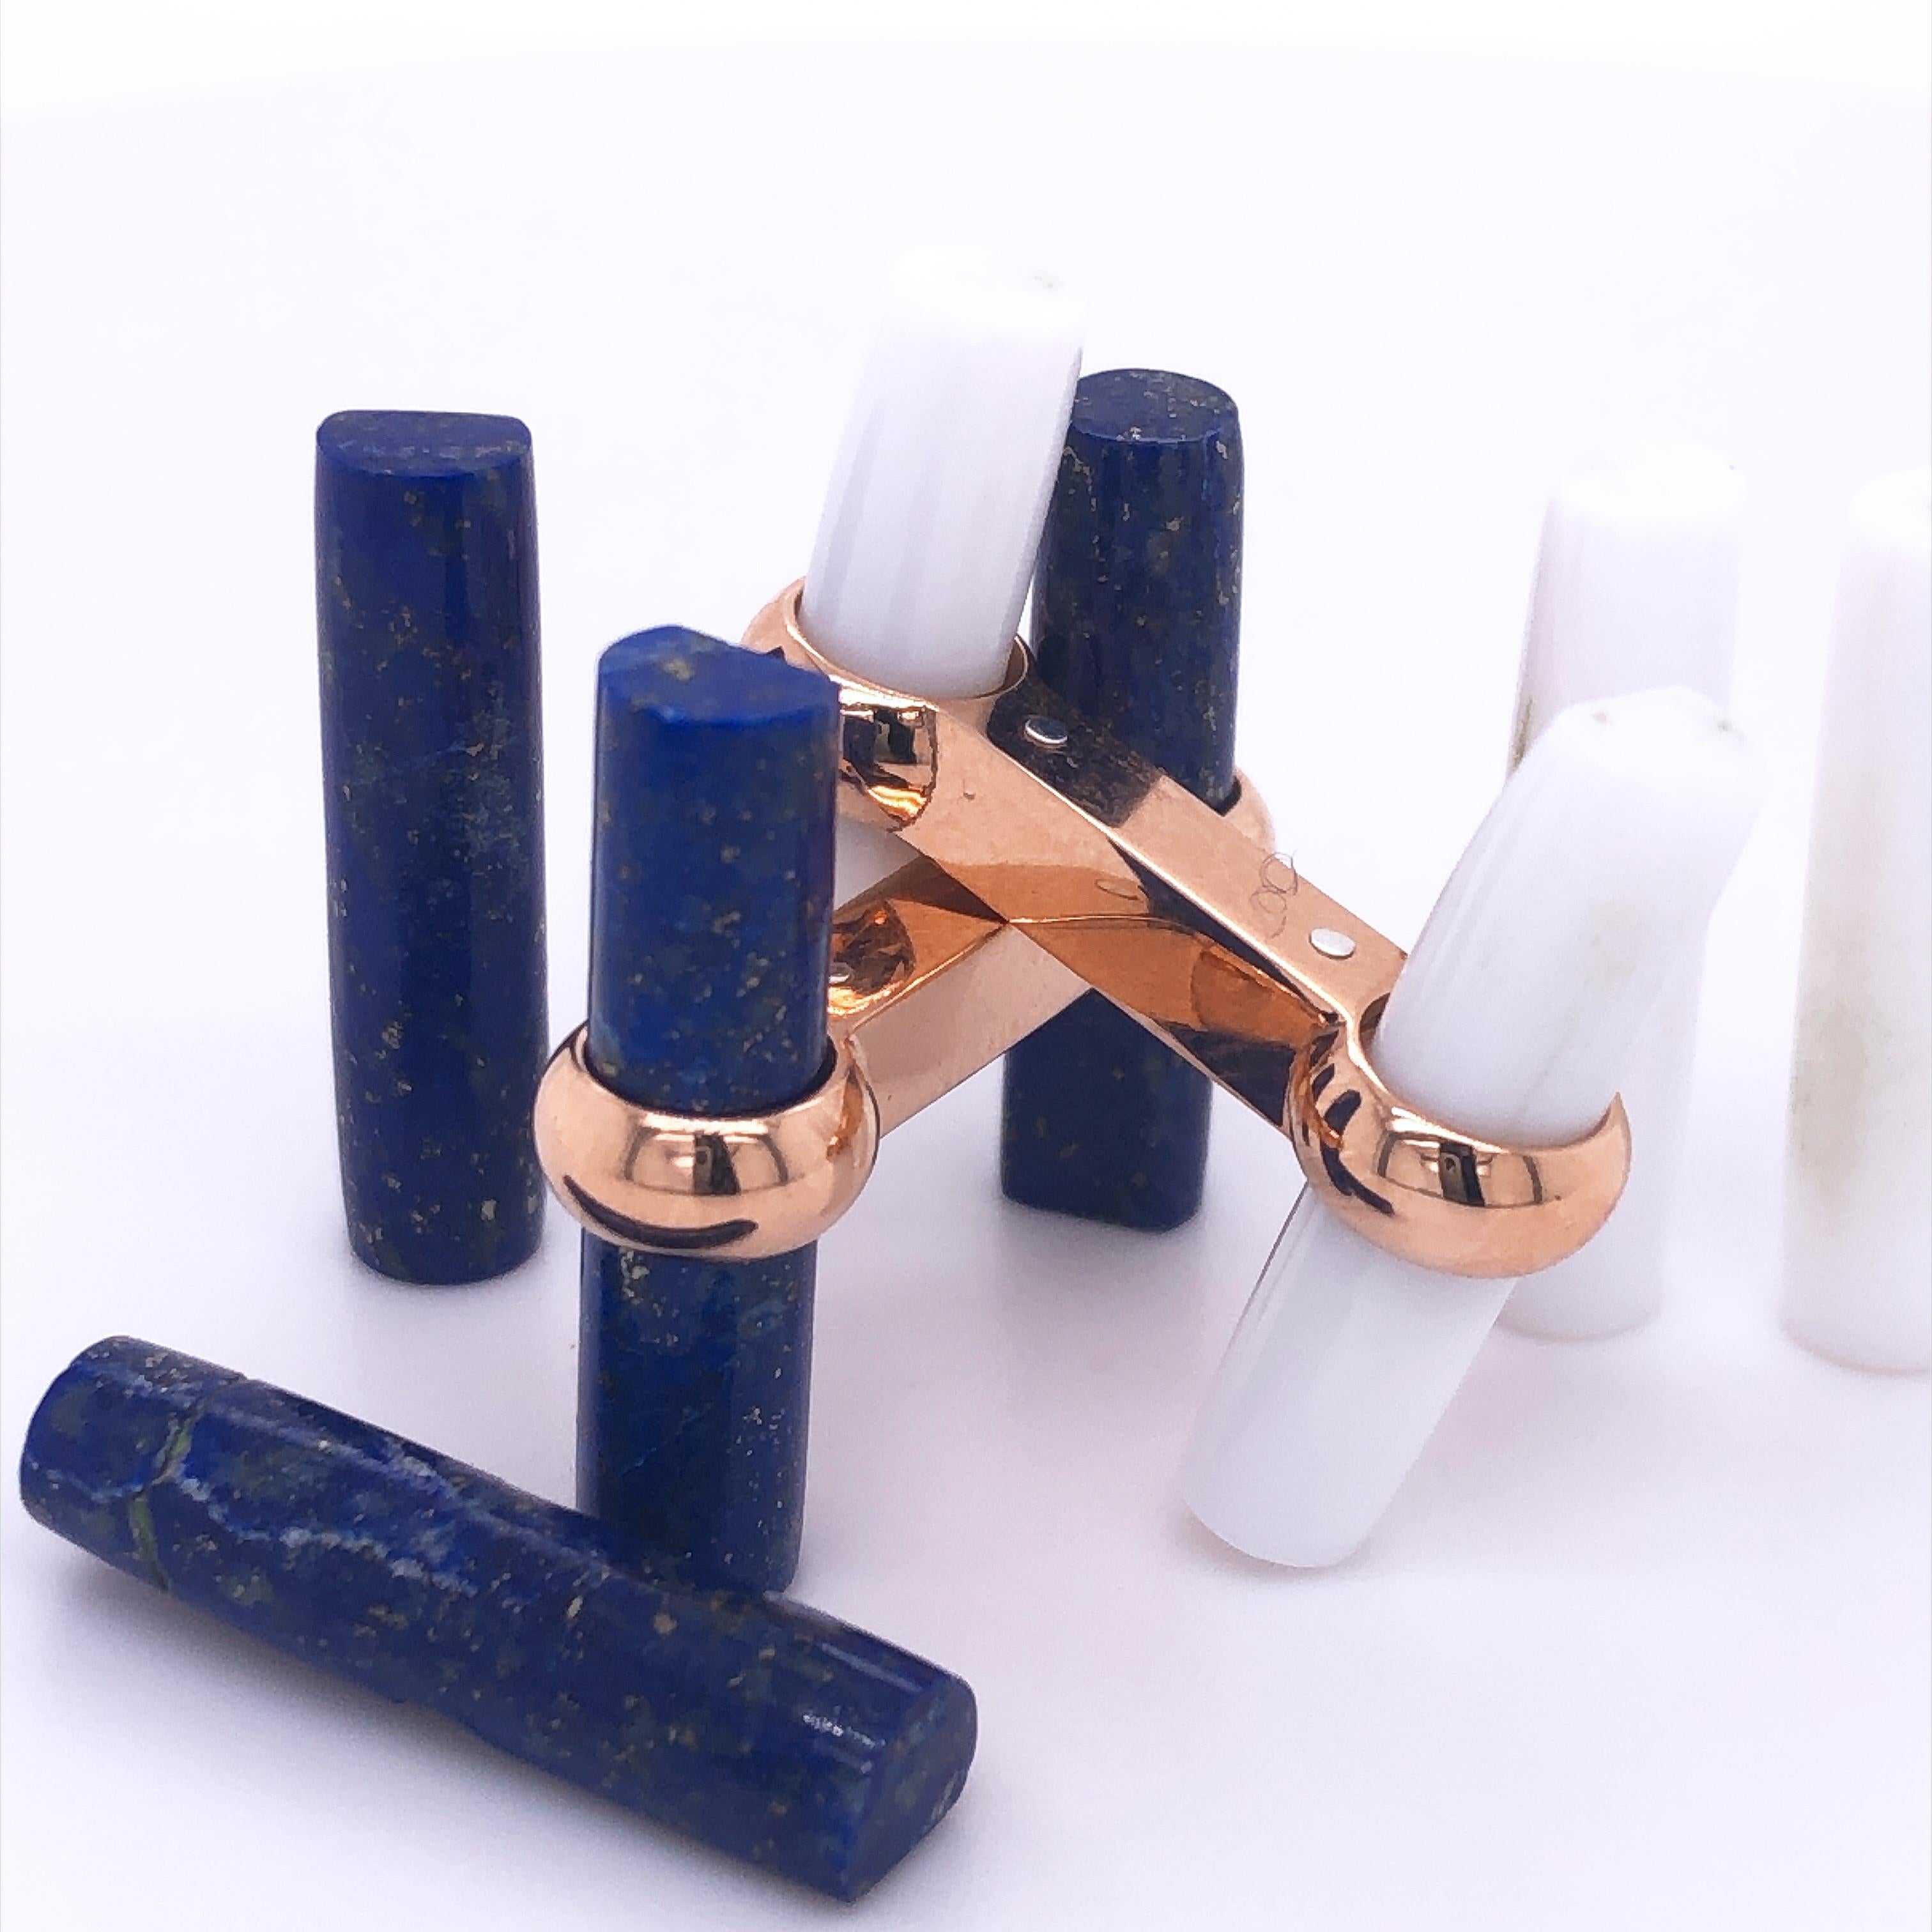 Berca Interchangeable Semiprecious Stones Baton Set 18 Carat Rose Gold Cufflinks In New Condition For Sale In Valenza, IT